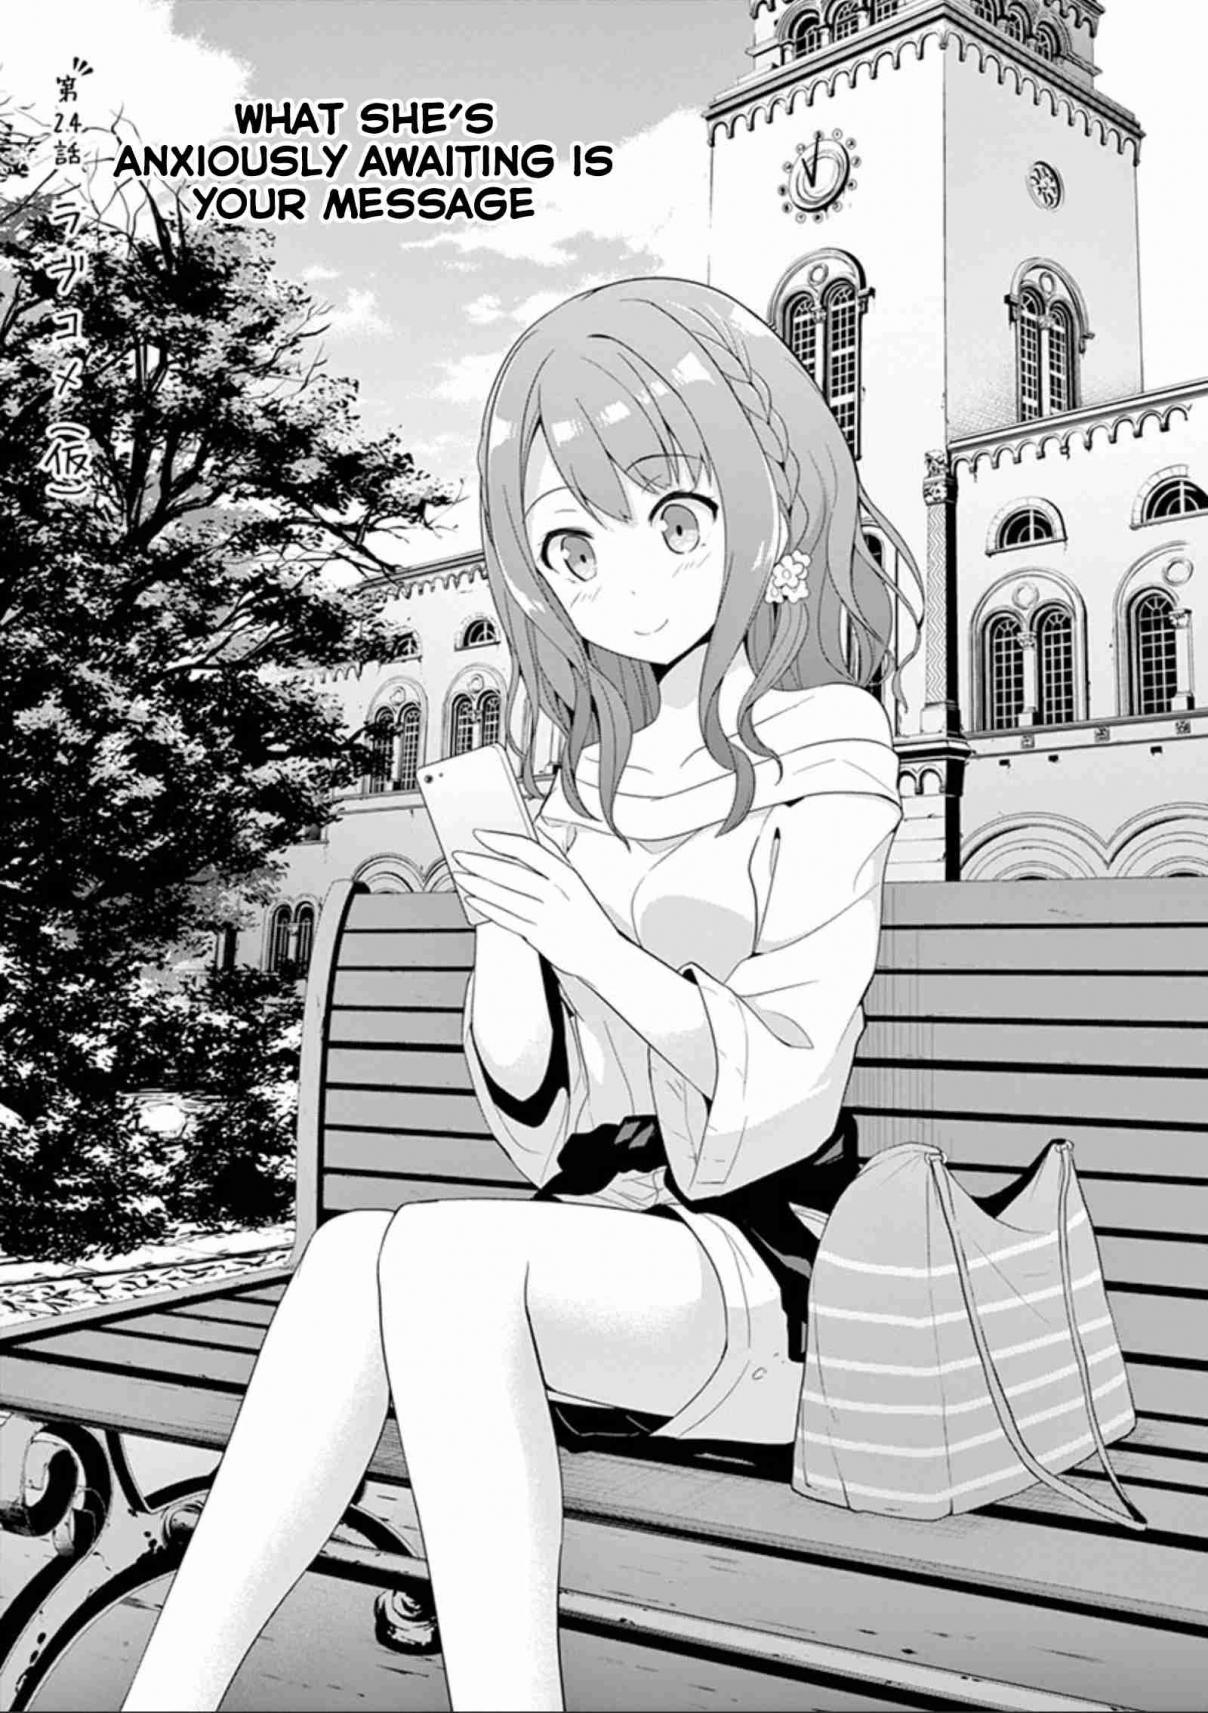 Imouto Sae Ireba Ii. @comic Vol. 5 Ch. 24 What she's anxiously waiting for is your message